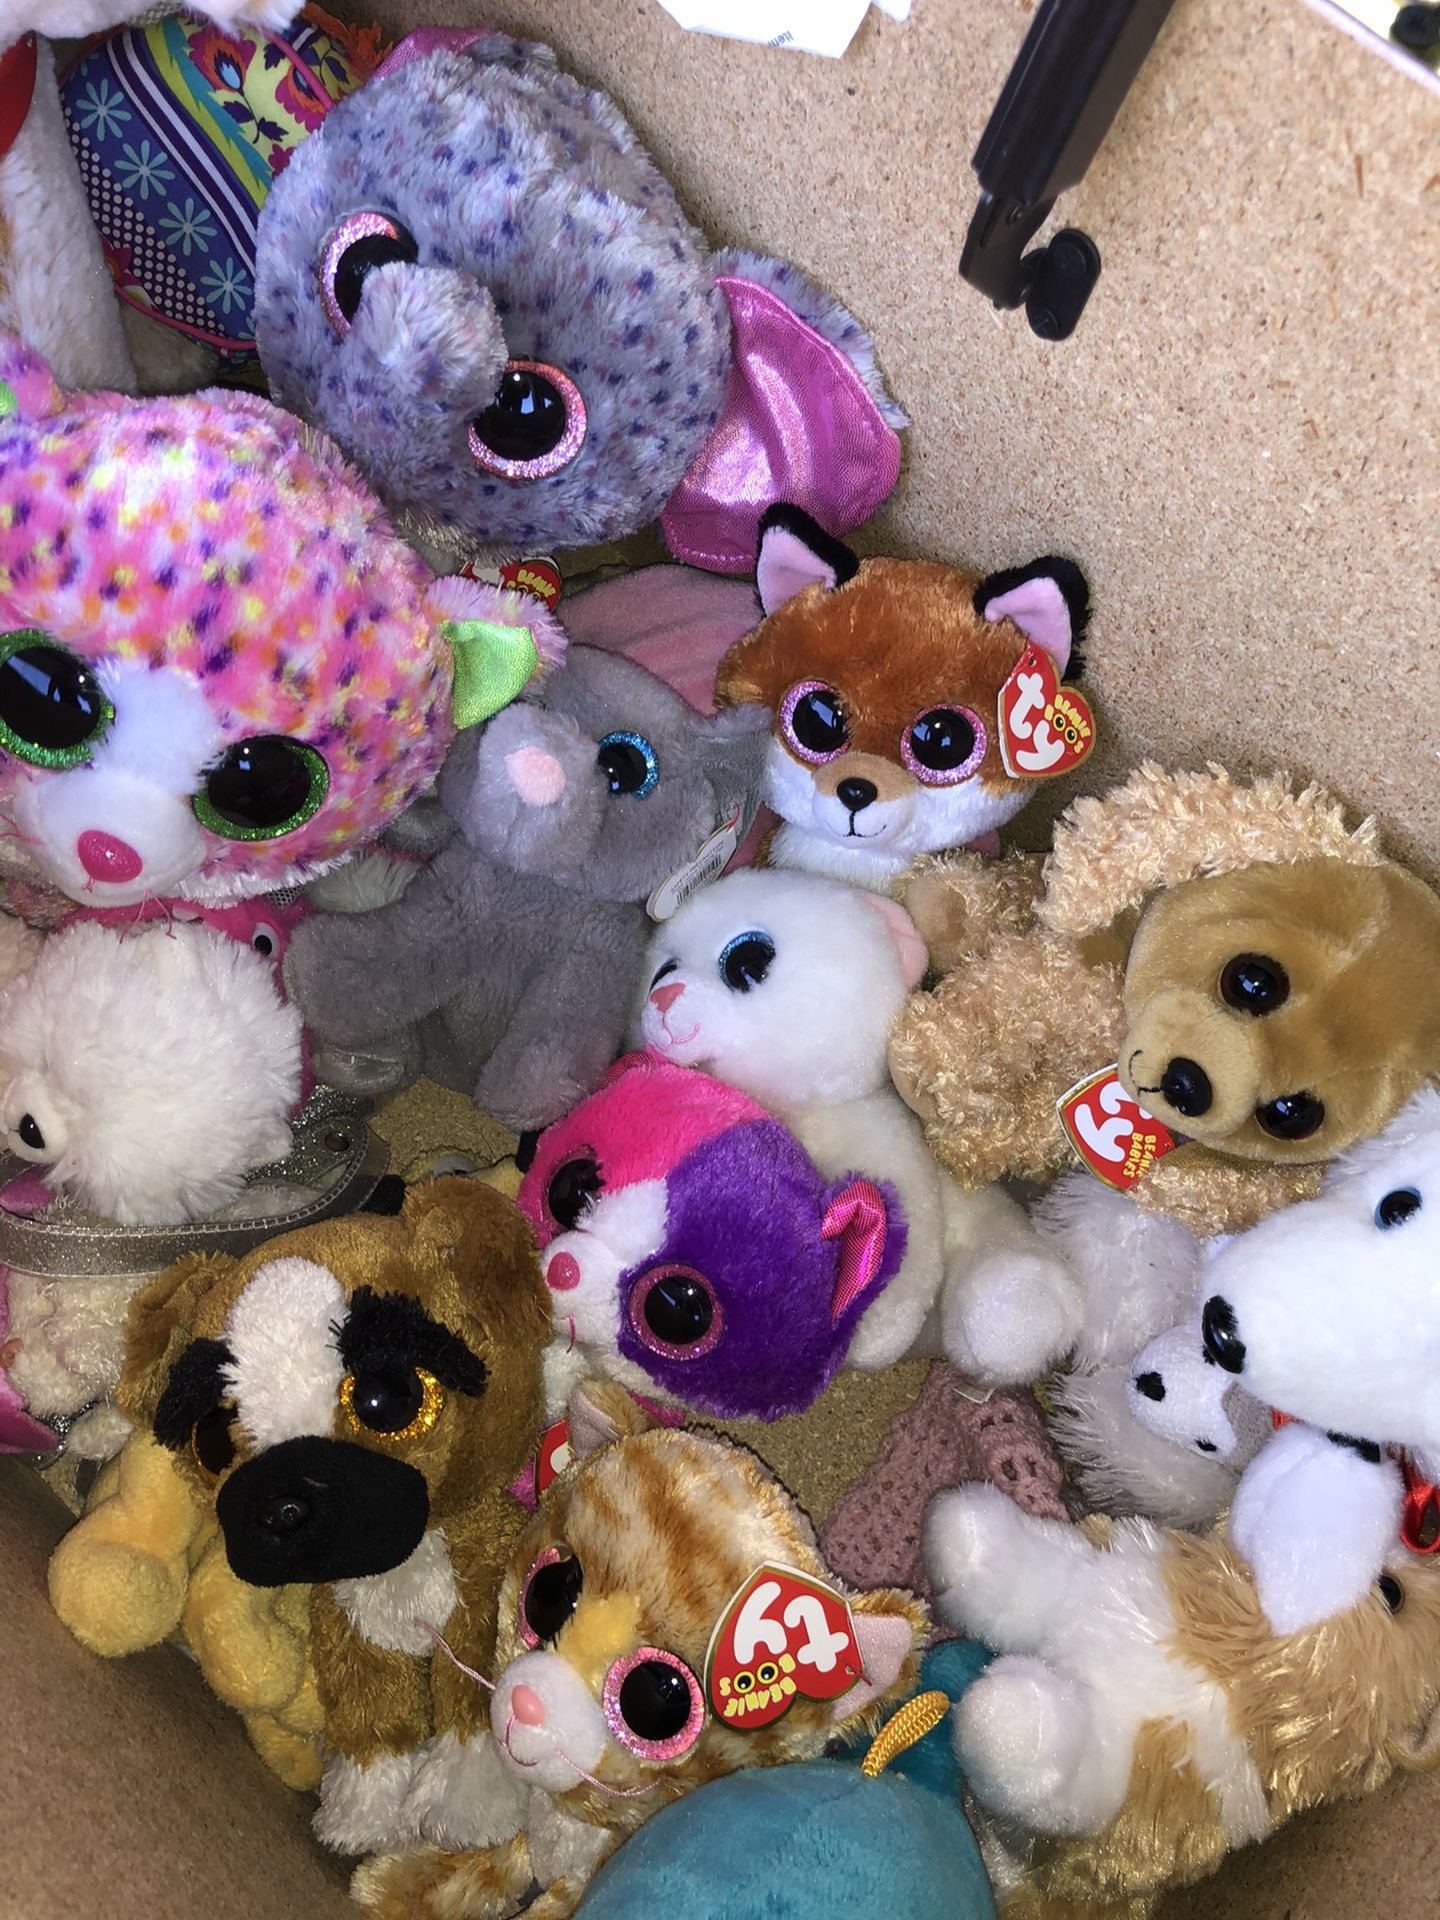 Original “ty beanie babies “ and trunk for Sale in Woodland Hills, CA ...